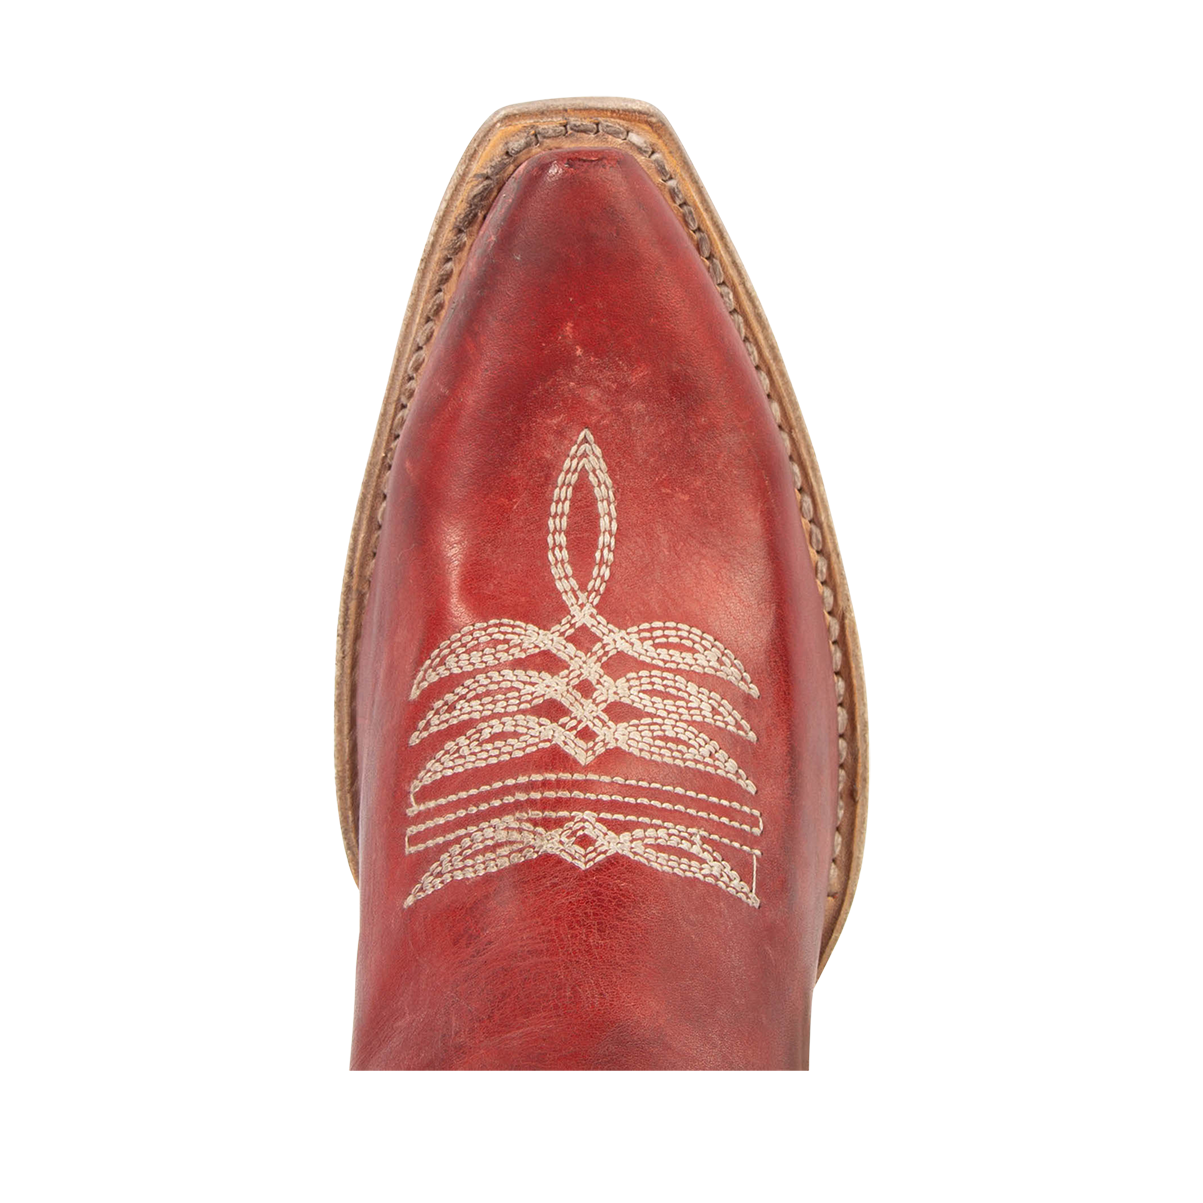 Top view showing snip toe with traditional stitching on FREEBIRD women's Wolfgang red tall western boot